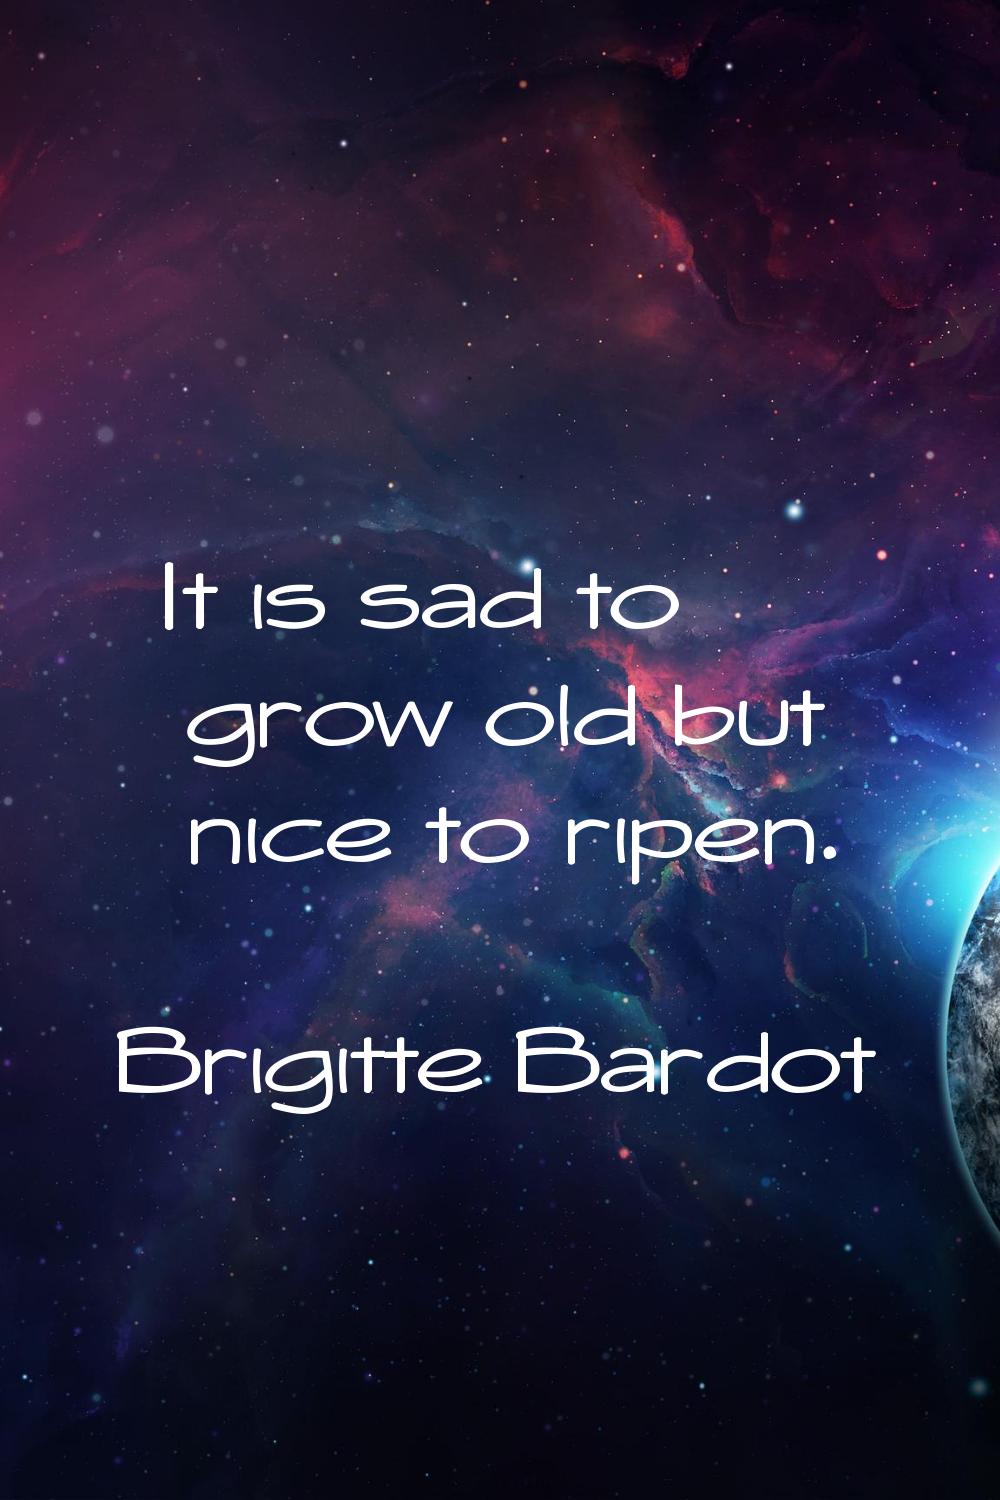 It is sad to grow old but nice to ripen.